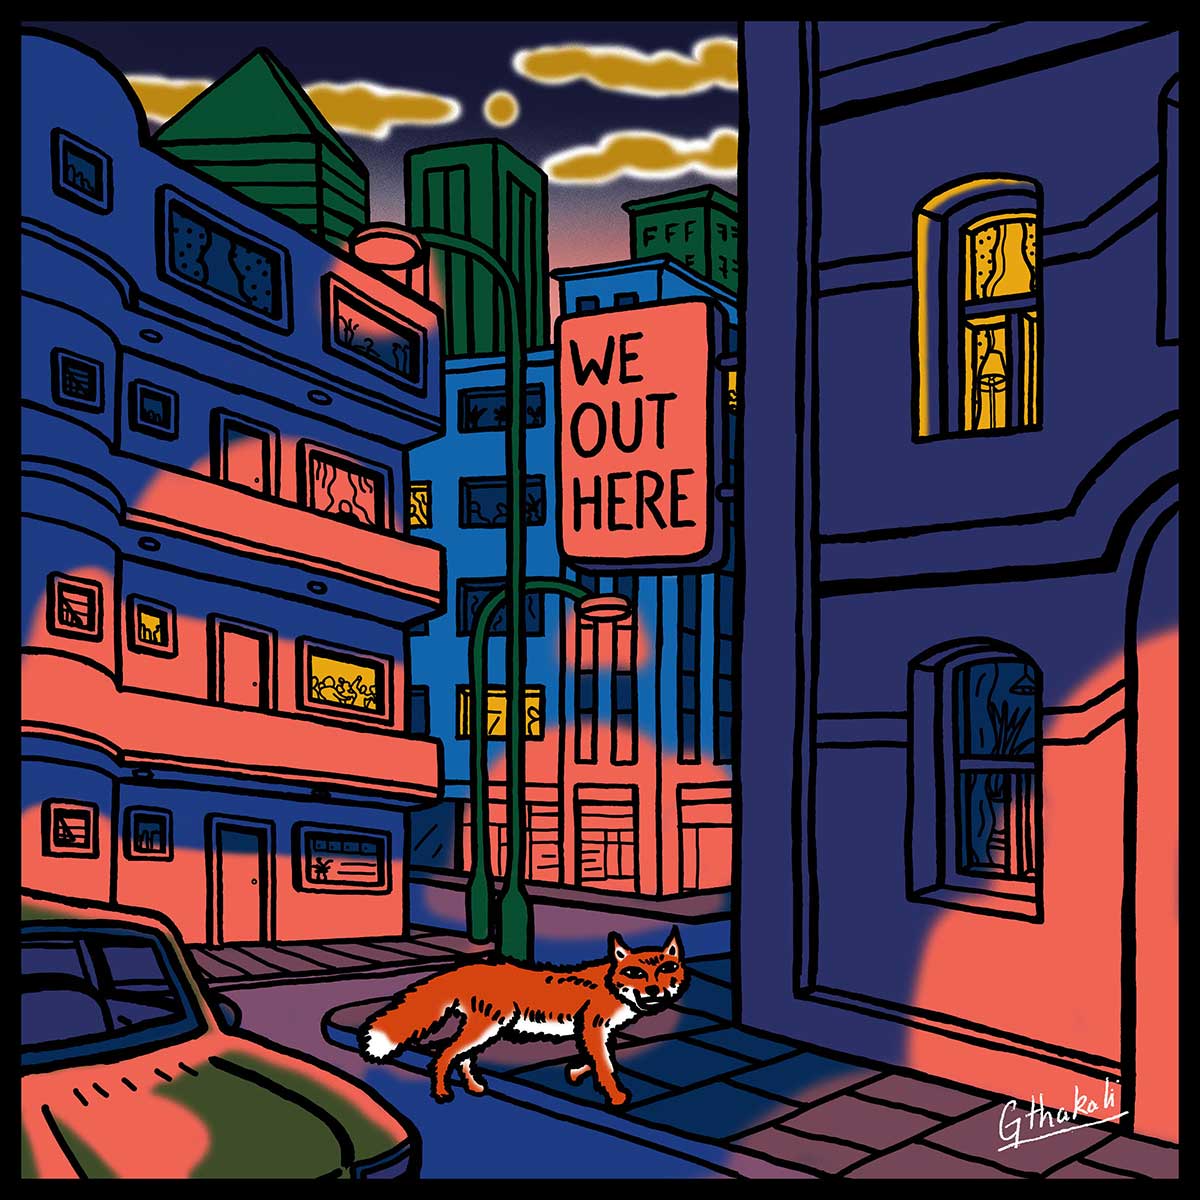 Cover art for Brownswood Recordings compilation album 'We Out Here' by Gaurab Thakali